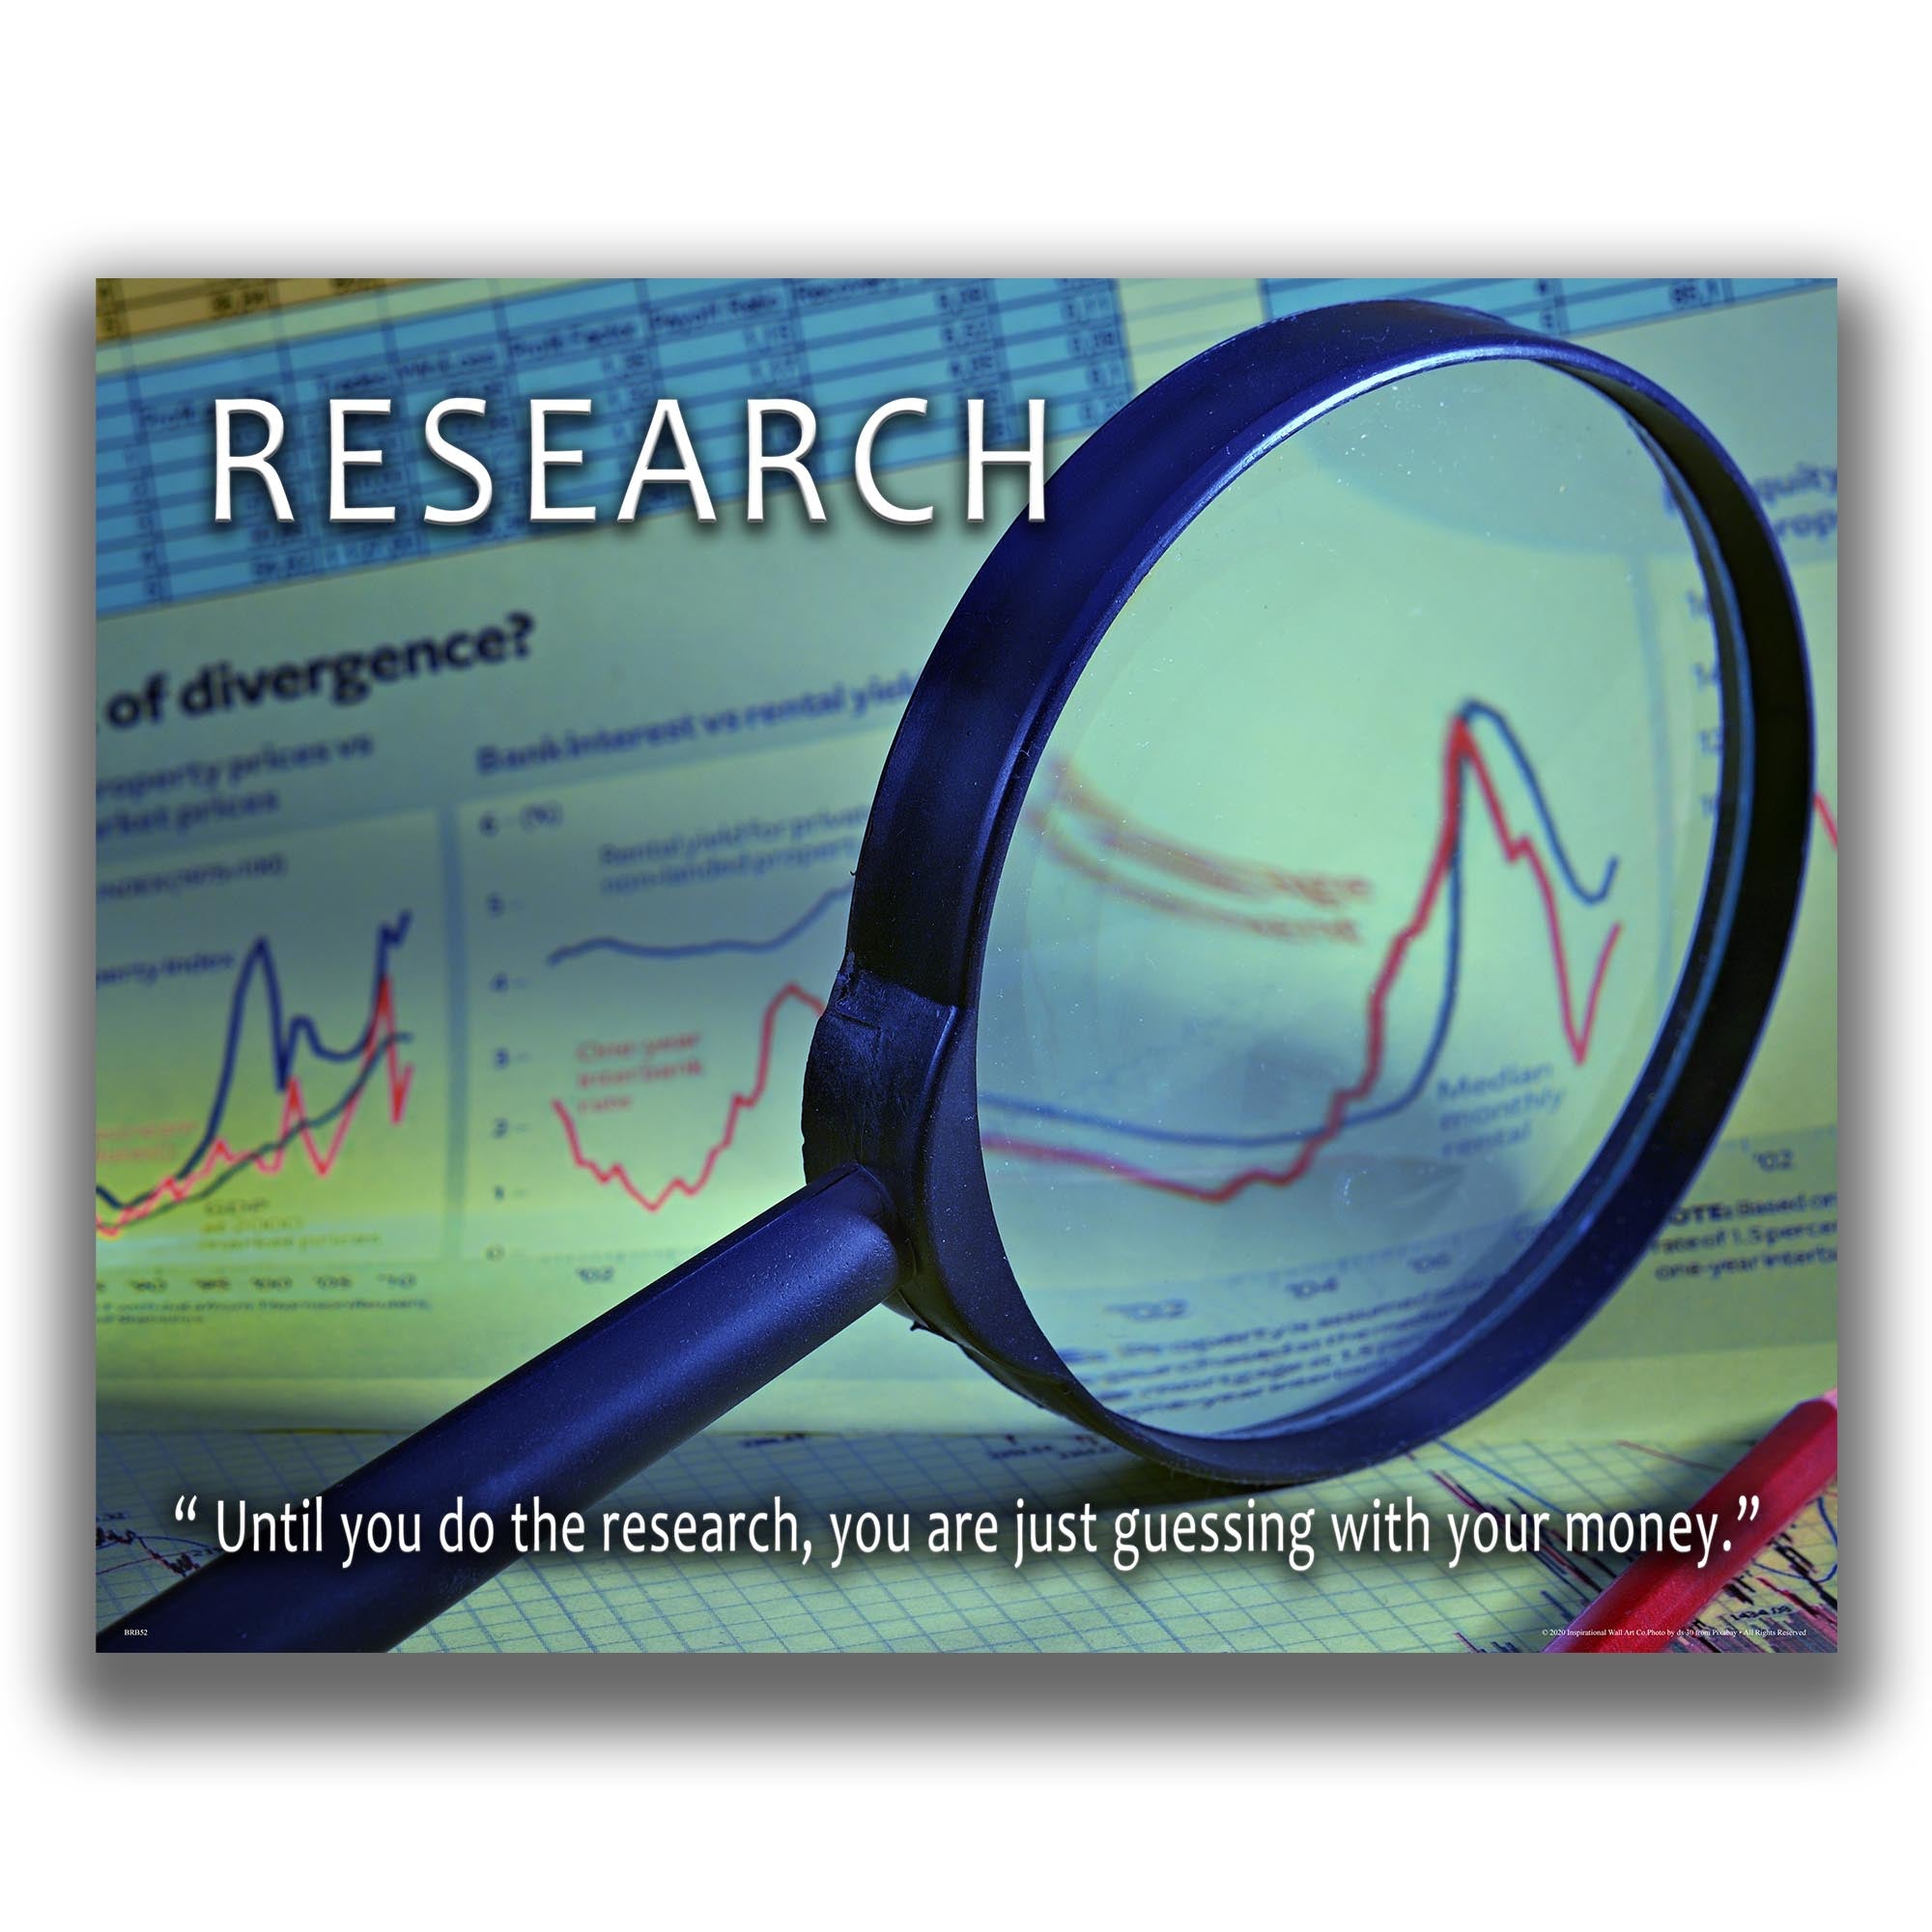 Research - Stock Market Poster